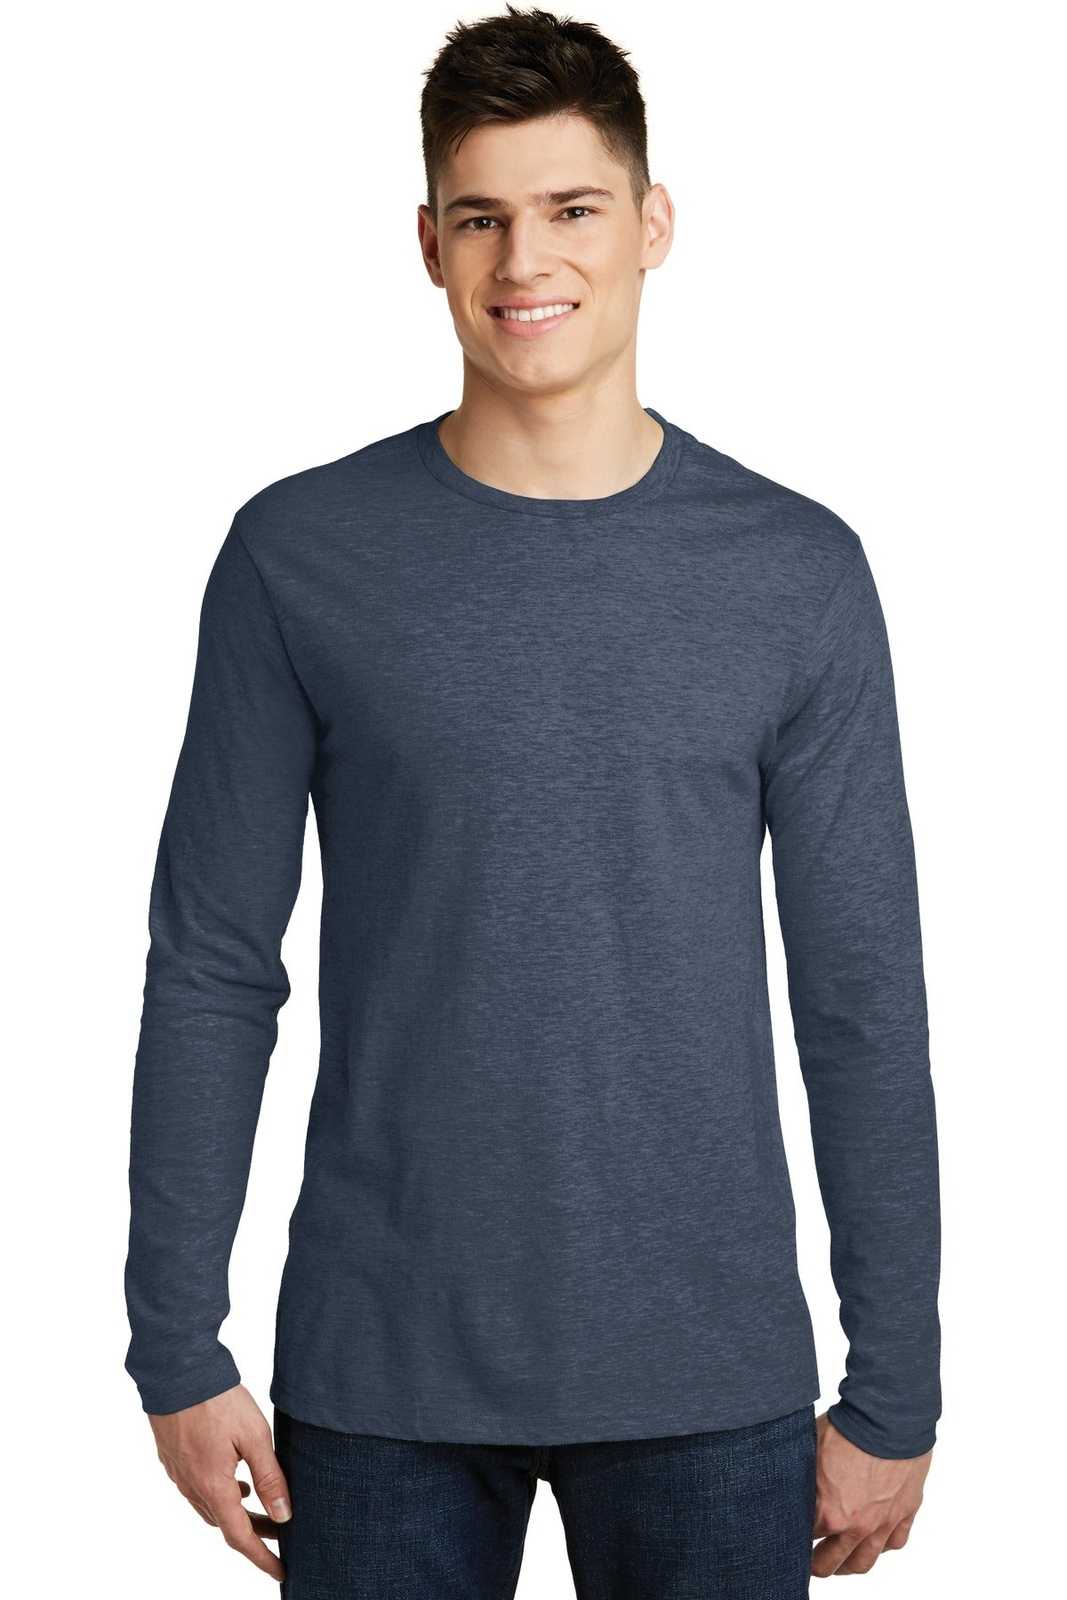 District DT6200 Very Important Tee Long Sleeve - Heathered Navy - HIT a Double - 1